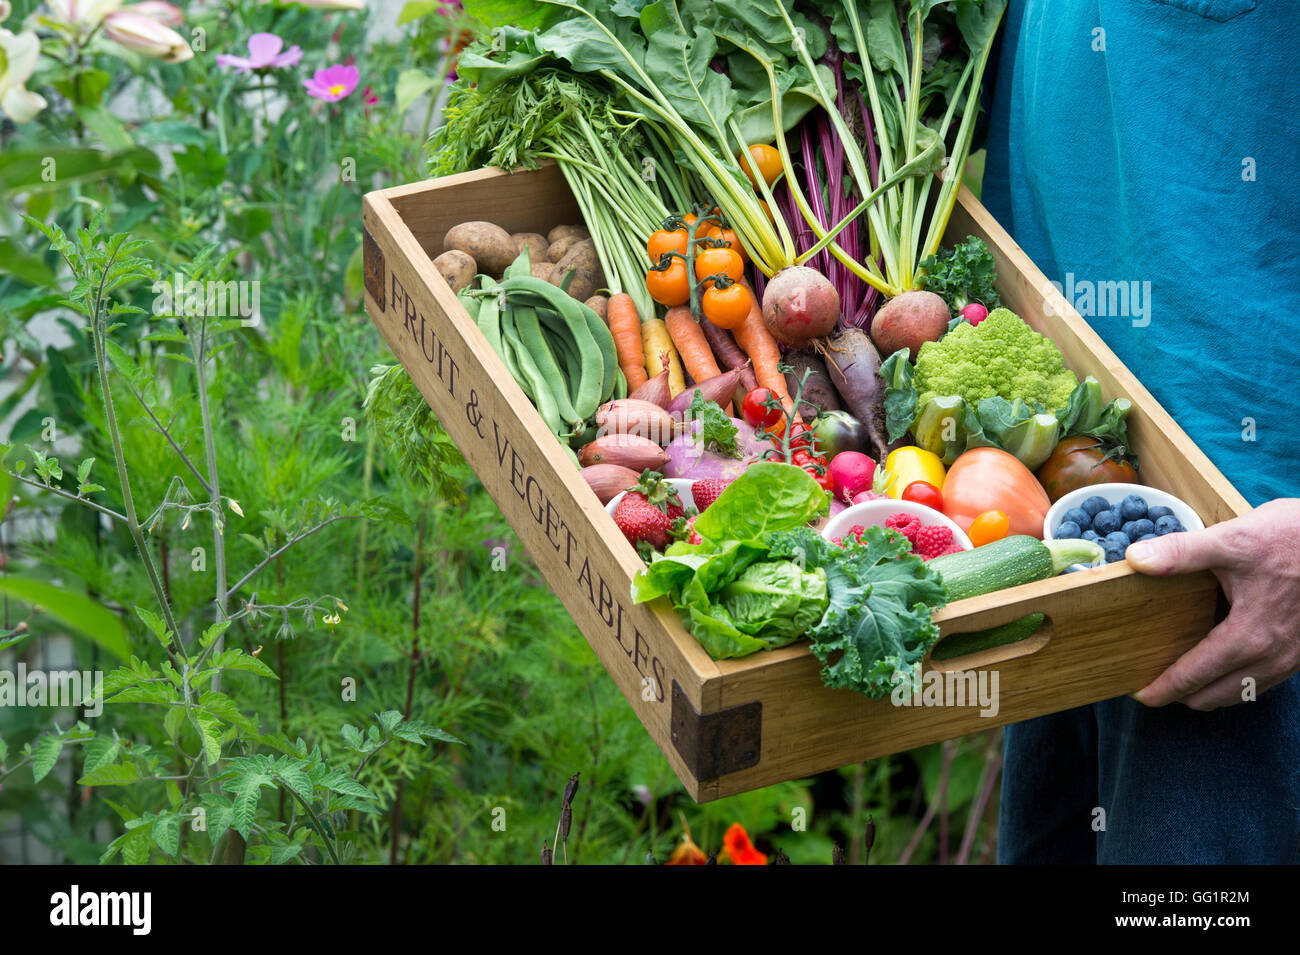 Man holding a Wooden tray of harvested fruit and vegetables in an English cottage garden Stock Photo